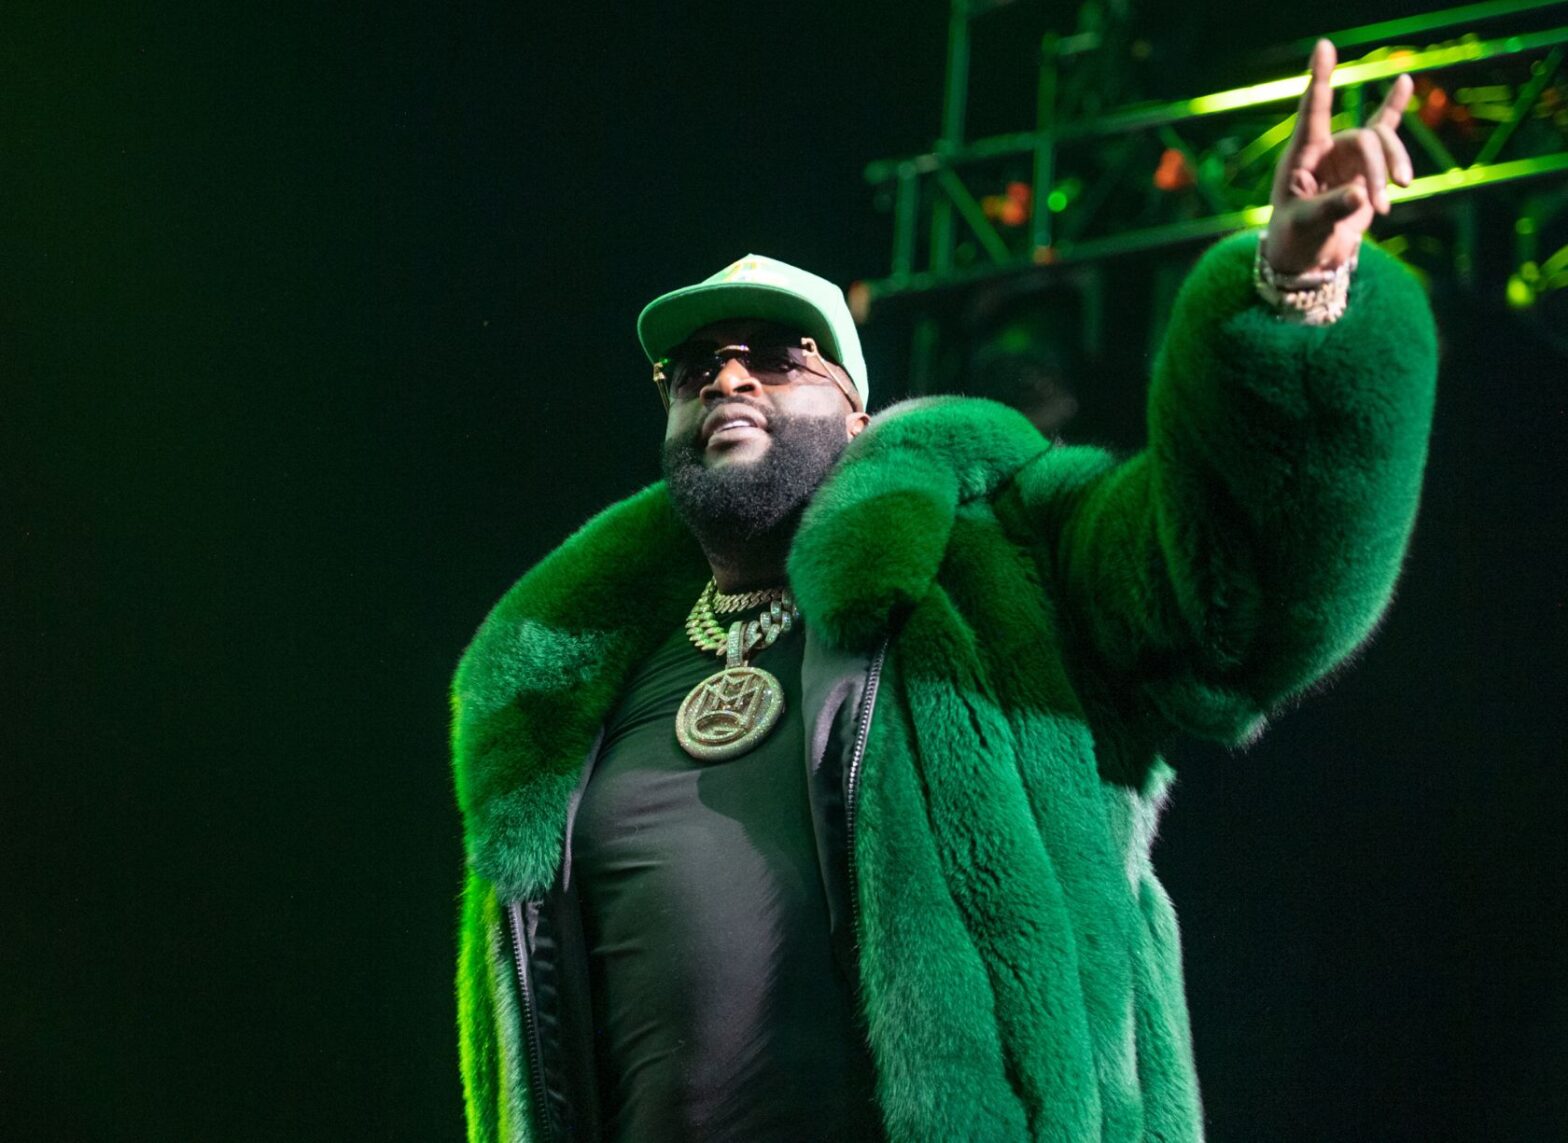 Rick Ross on stage in green fur coat